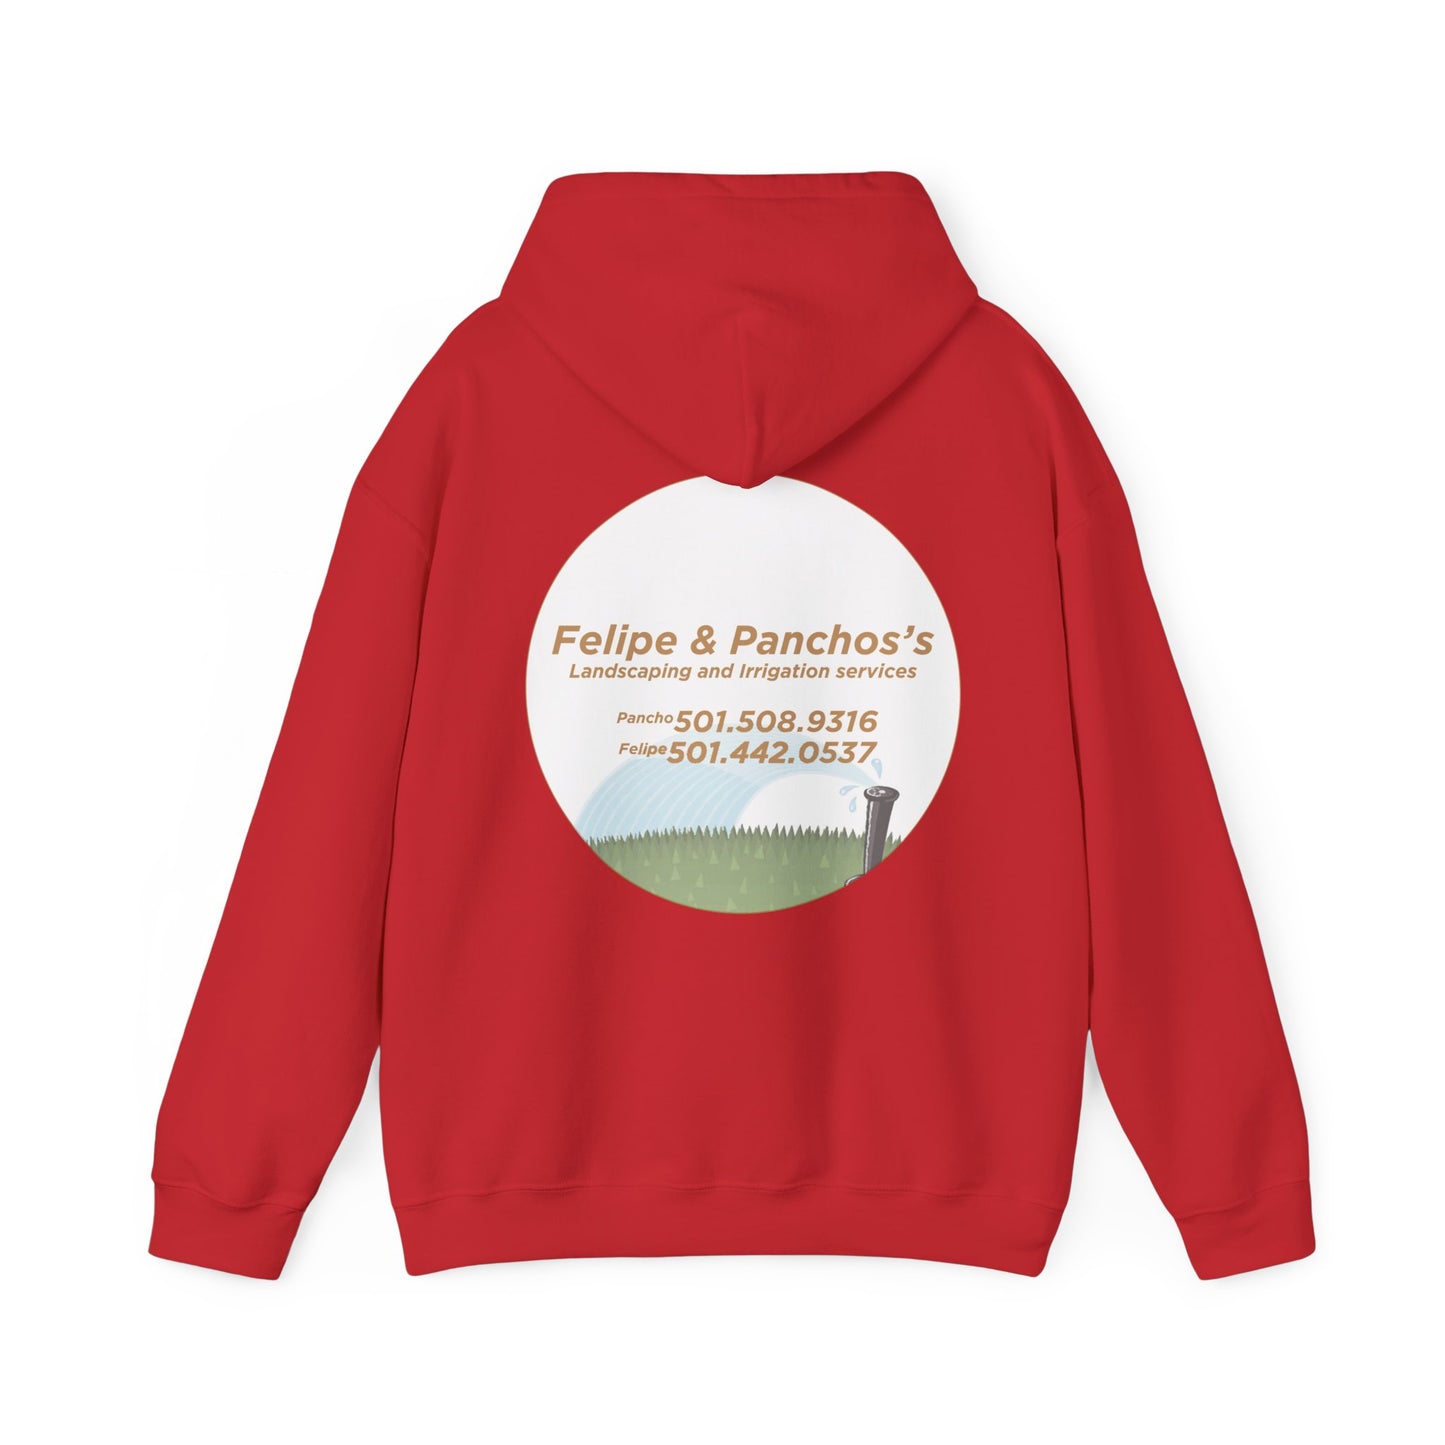 Felipe and Panchos's Landscaping and Irrigation Services Hoodies